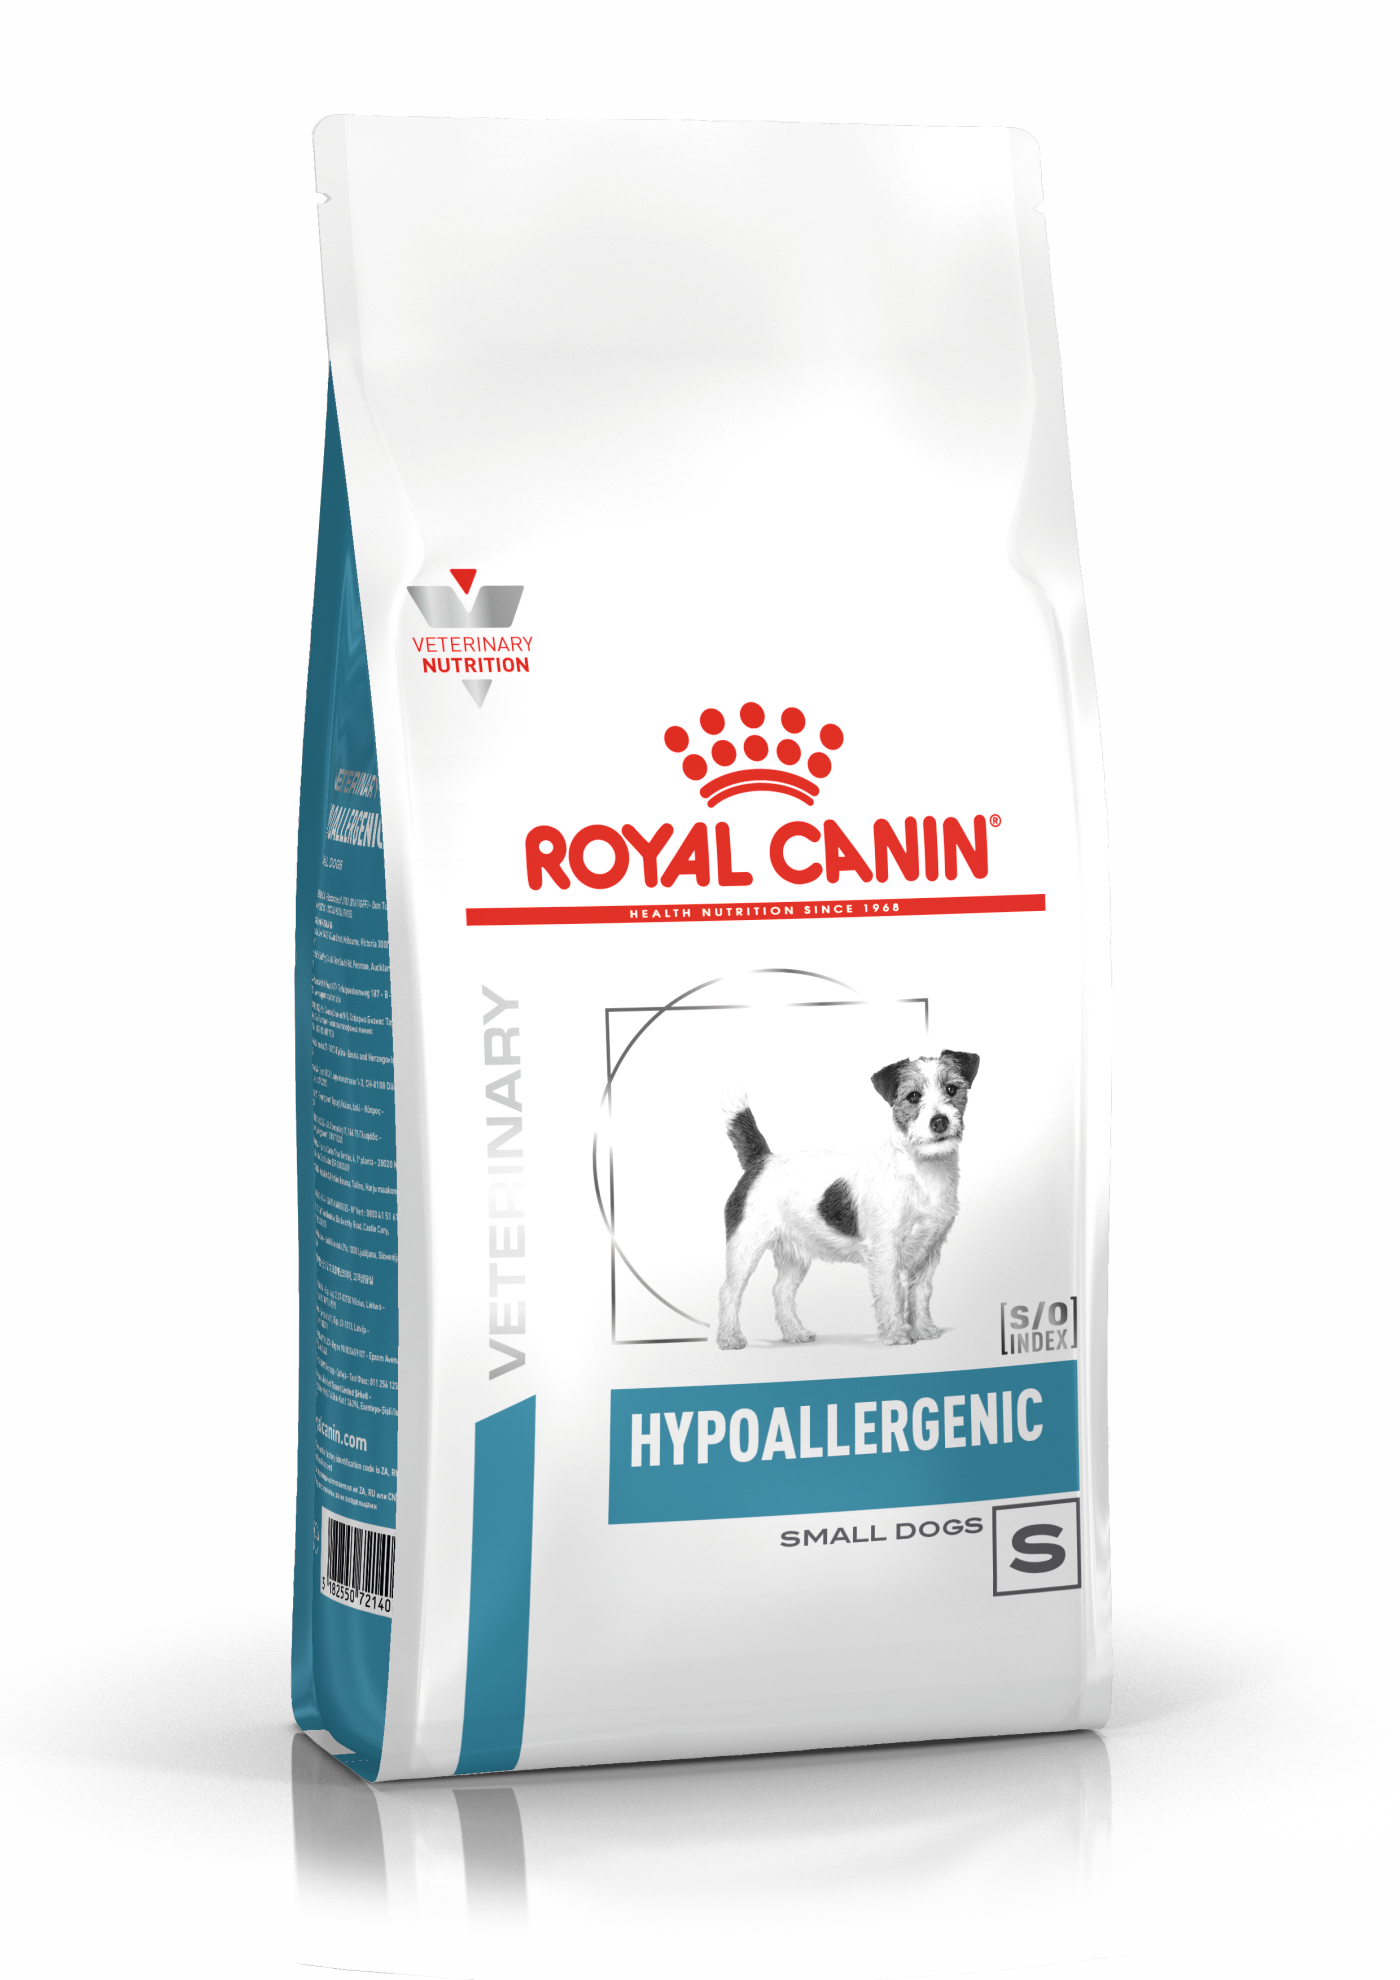 HYPOALLERGENIC SMALL DOGS